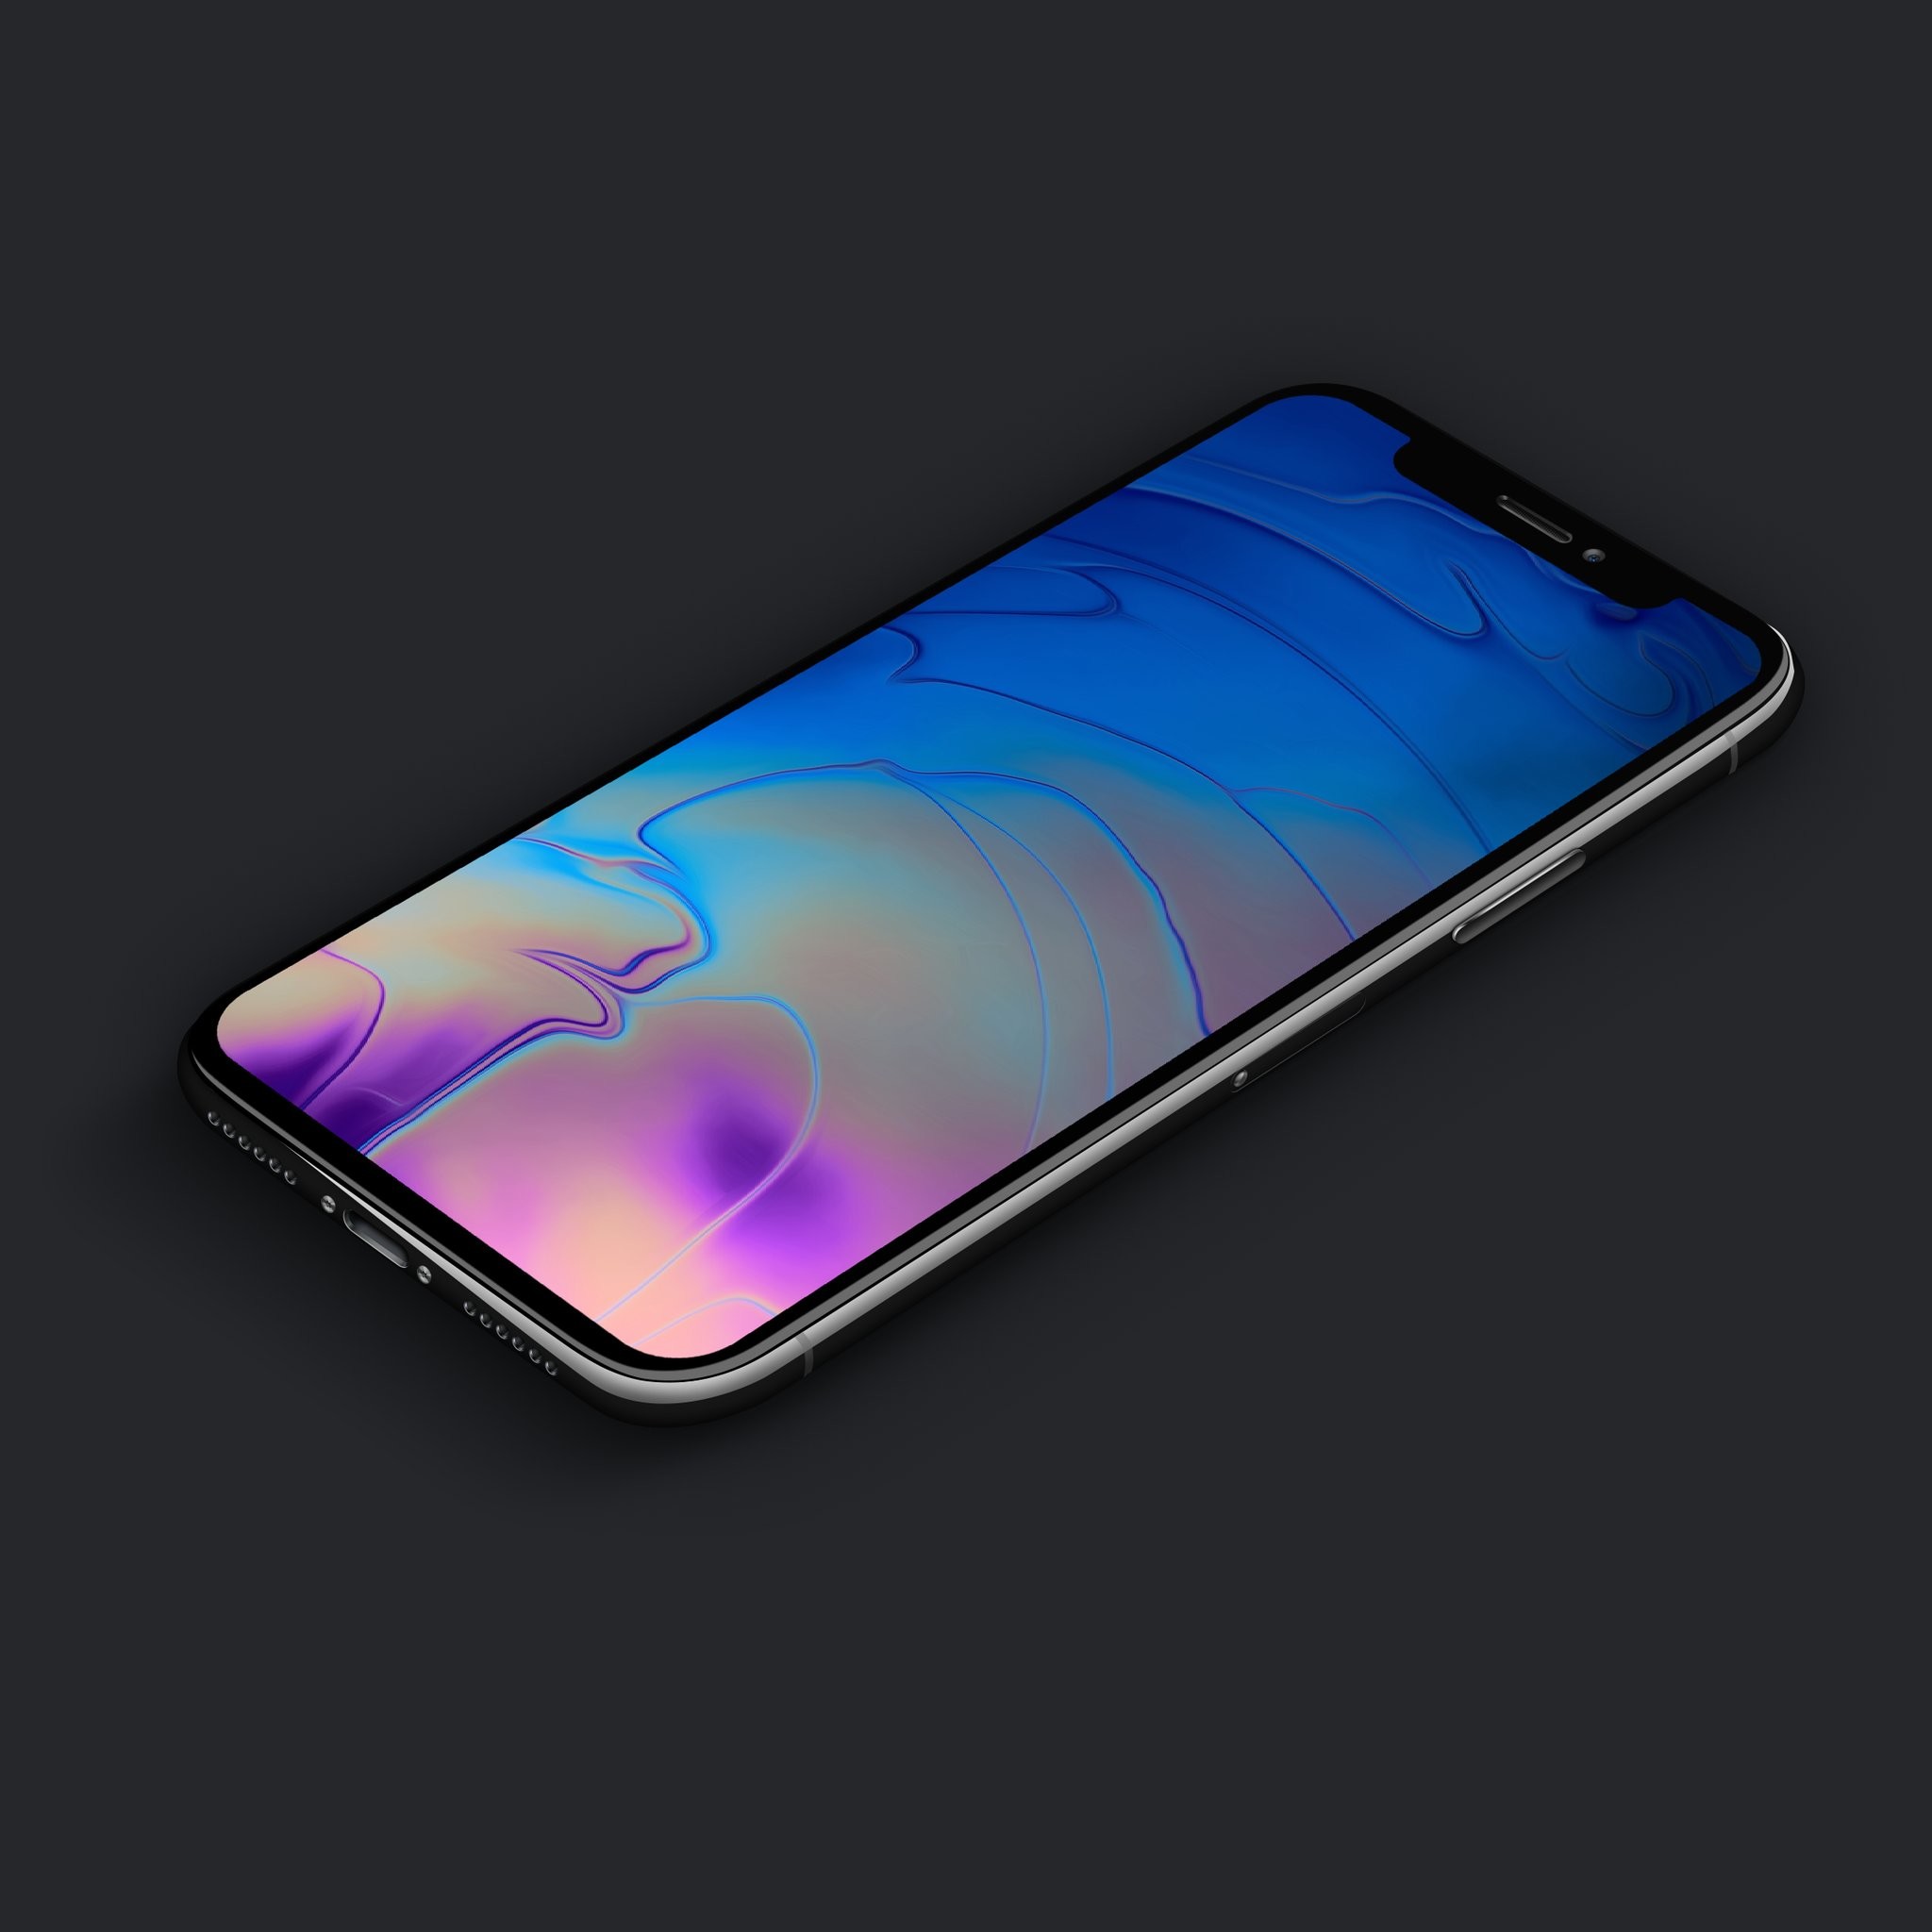 2048x2048 With any new product announcement, the website features new hardware with  fancy wallpapers. However, Apple rarely includes these wallpapers with any  ...